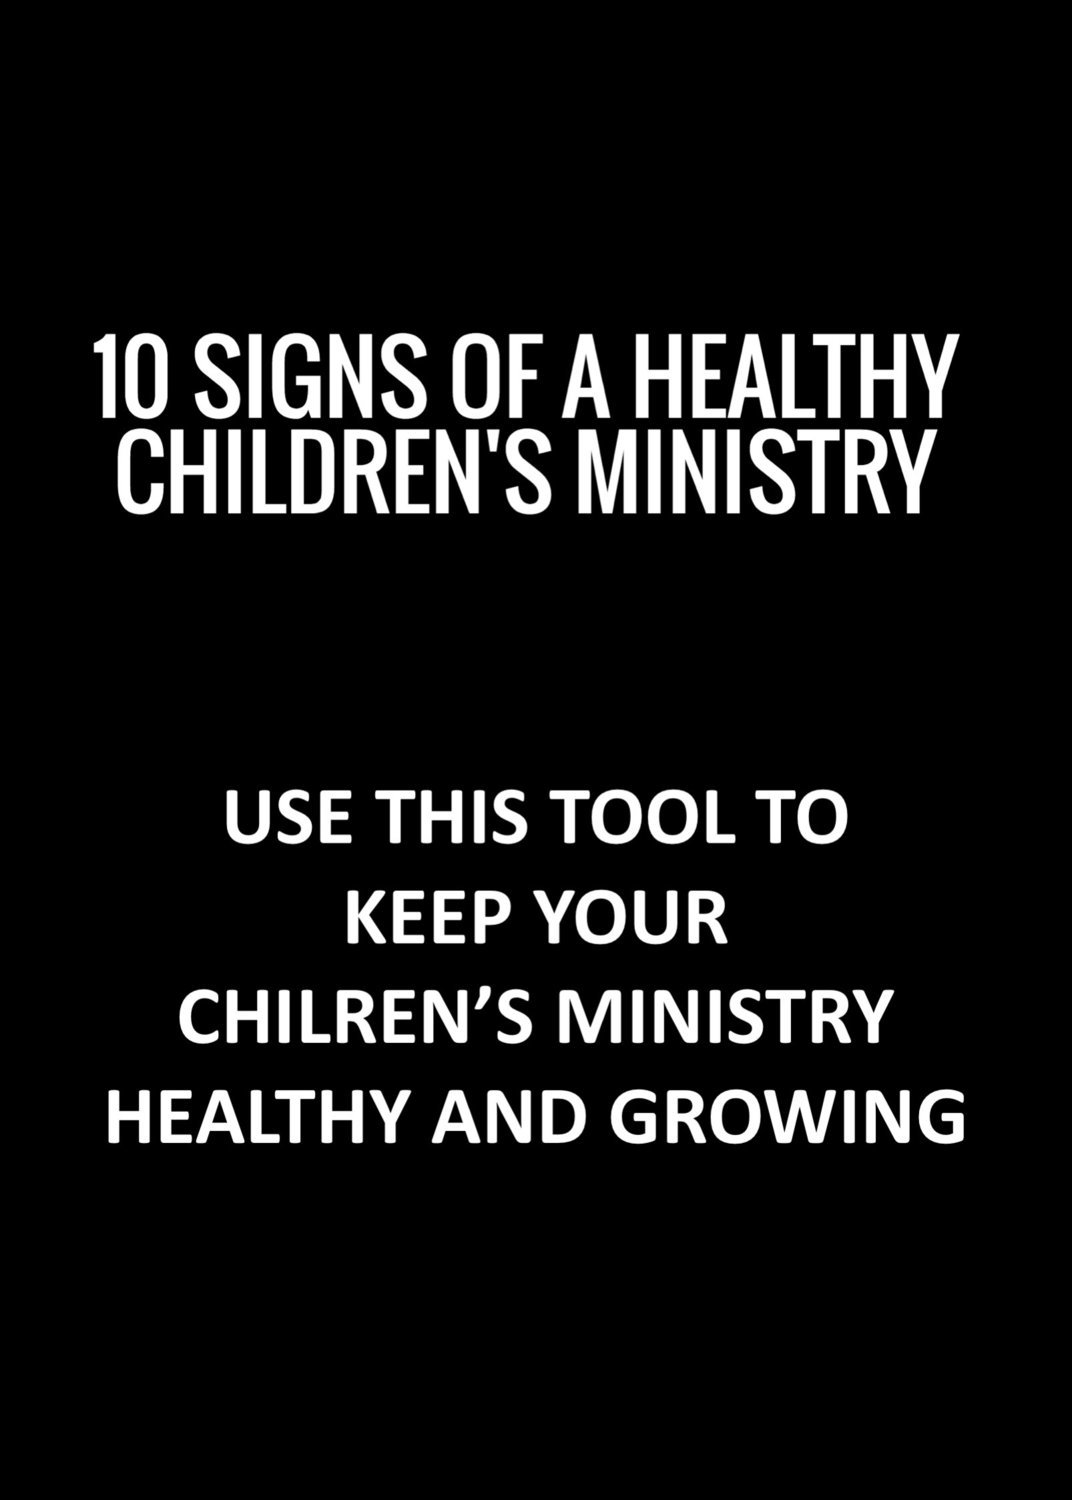 10 Signs of a Healthy Children's Minsitry